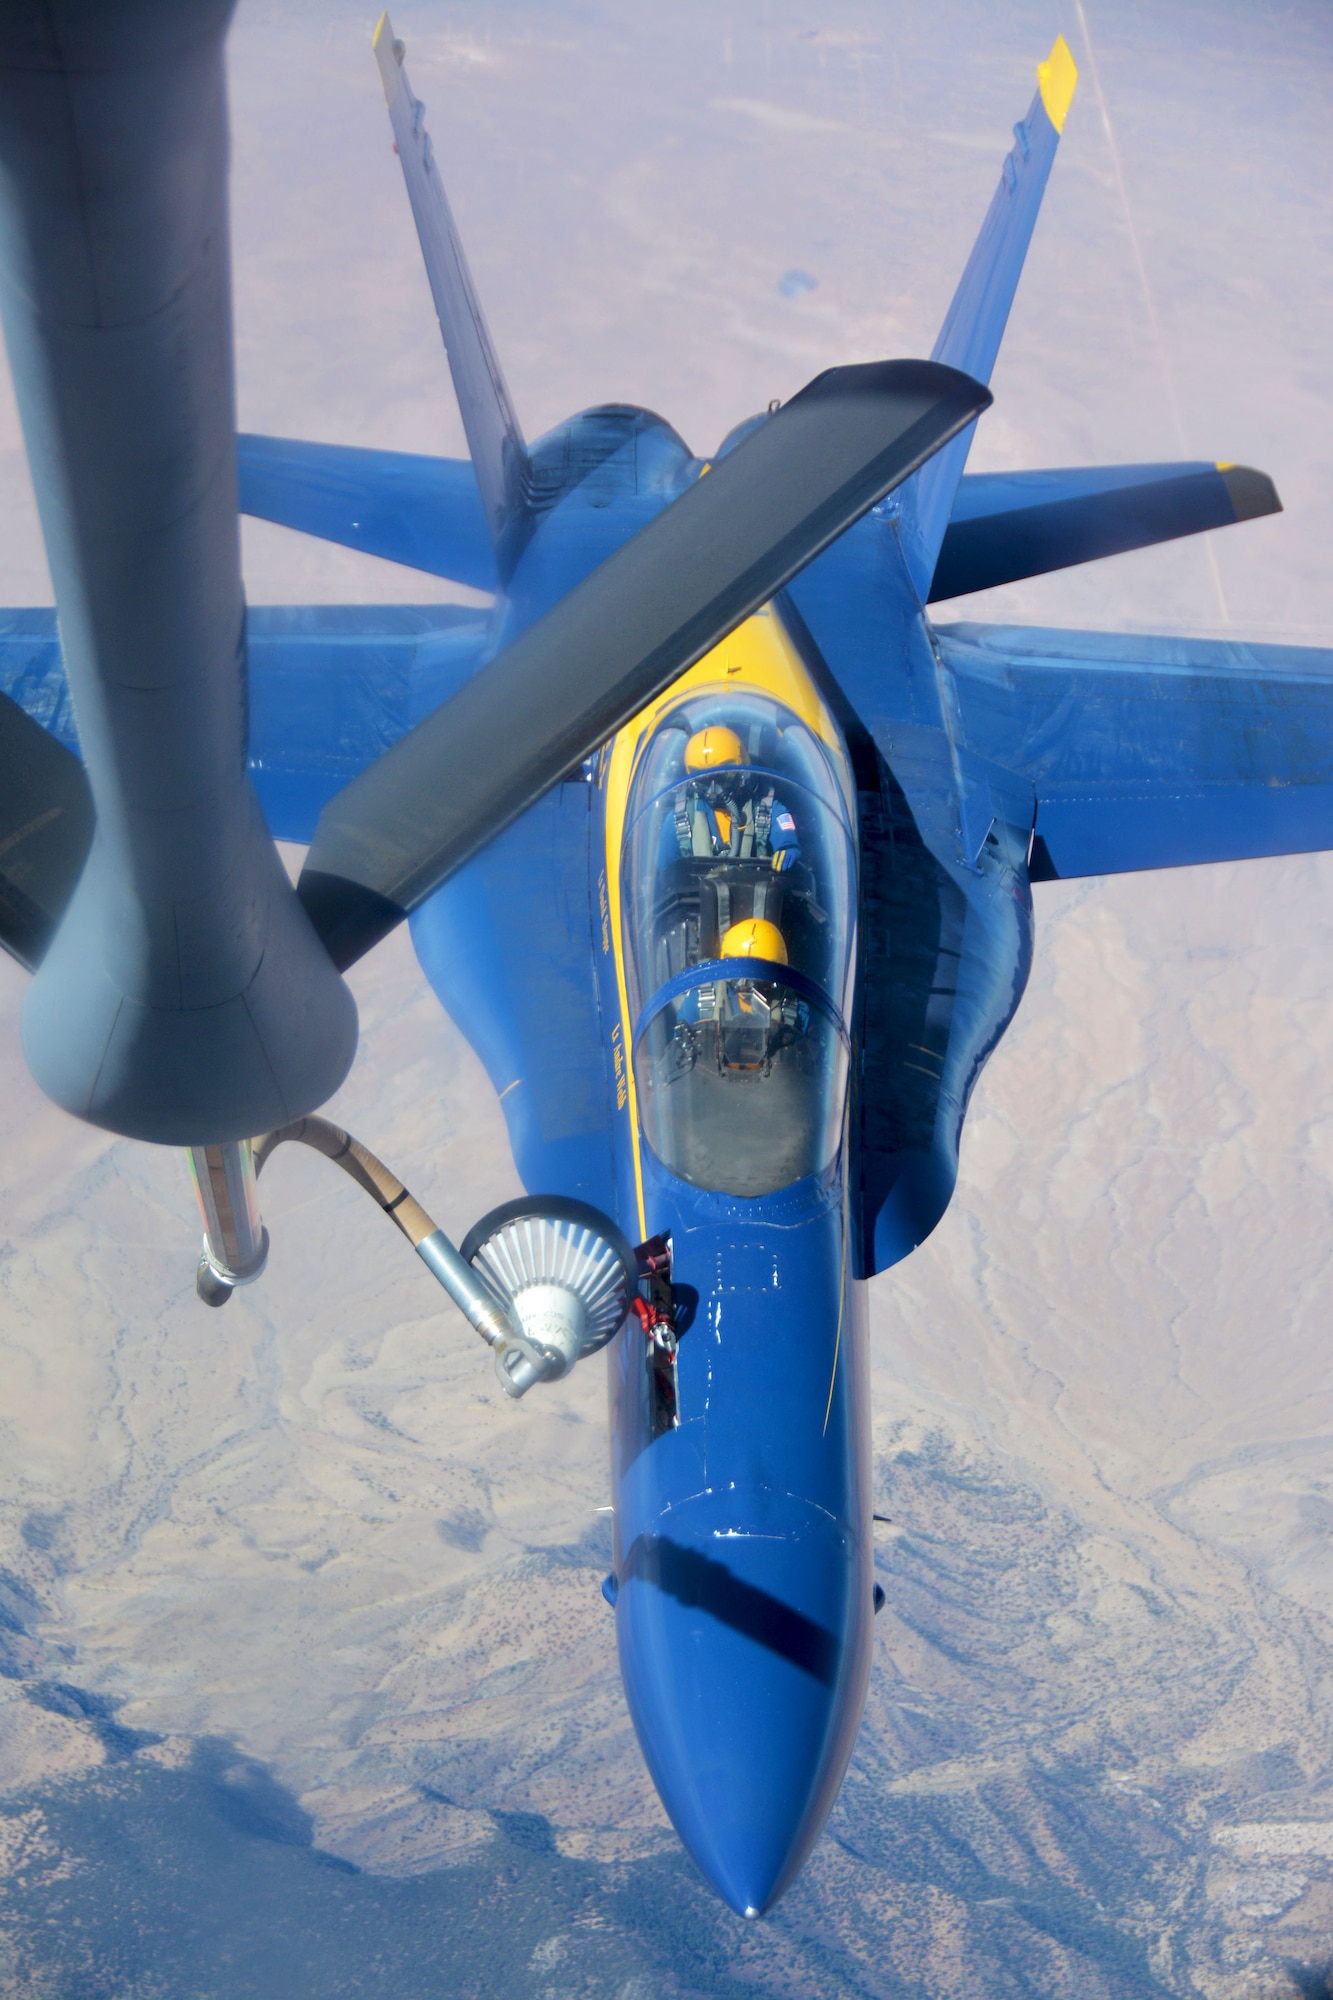 Reserve Citizen Airmen from the 507th Air Refueling Wing at Tinker Air Force Base, Okla., refueled seven F/A-18 Hornets from the U.S. Navy Blue Angels team March 19, 2018. The Blue Angels returned home to Pensacola Naval Air Station, Fla., after three months of training at El Centro Naval Air Facility, Calif. (U.S. Air Force photo/Tech. Sgt. Samantha Mathison)